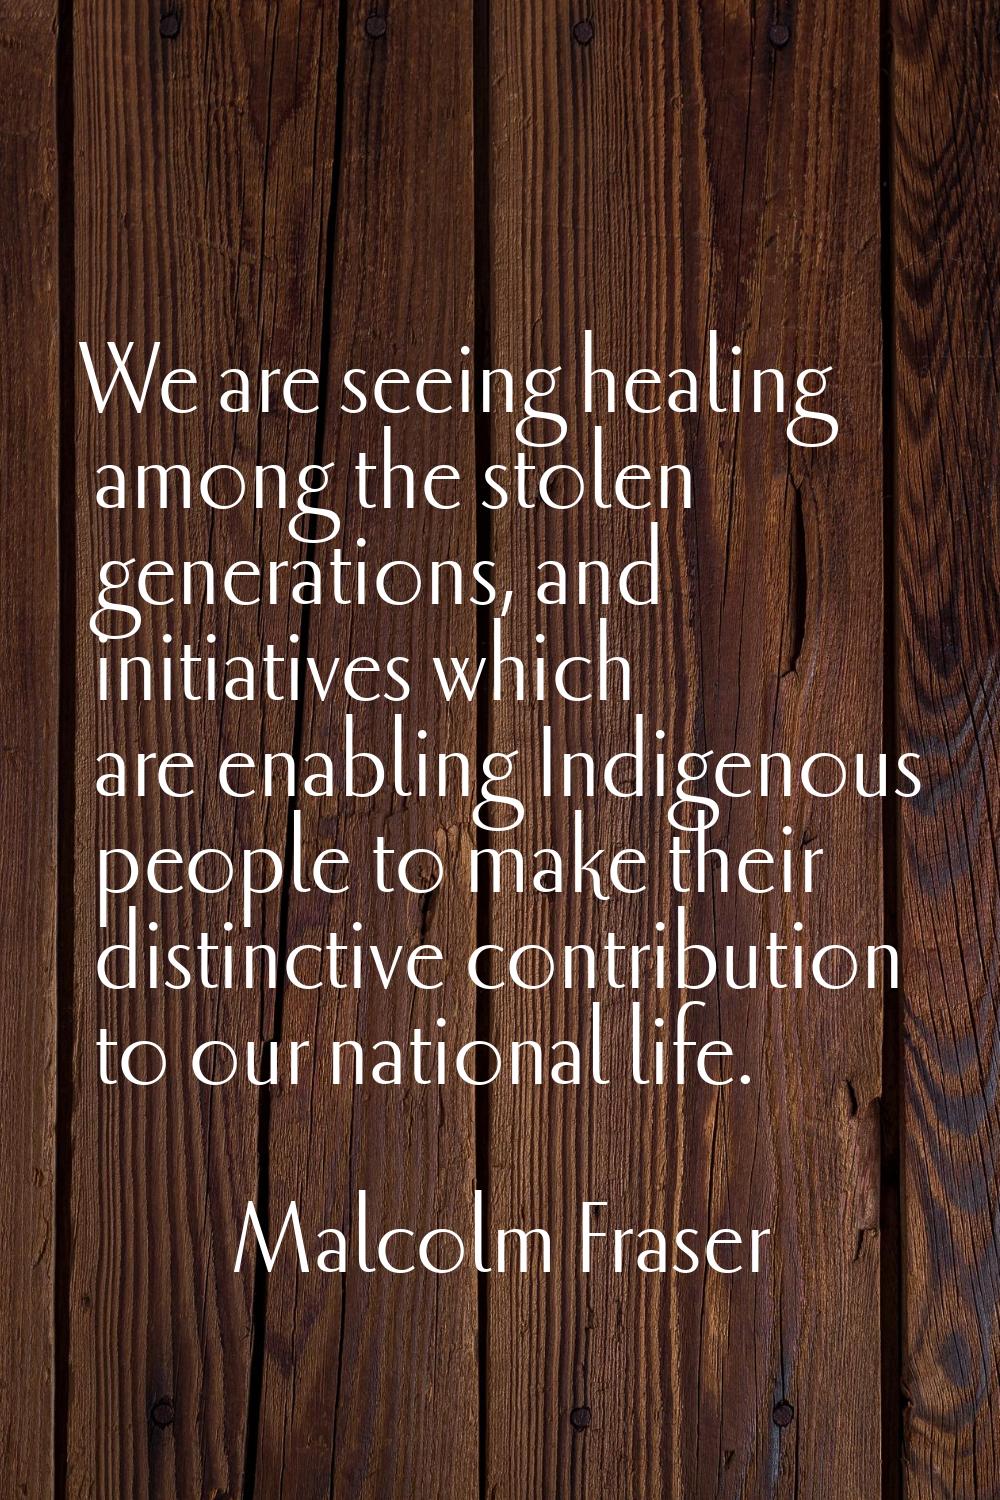 We are seeing healing among the stolen generations, and initiatives which are enabling Indigenous p